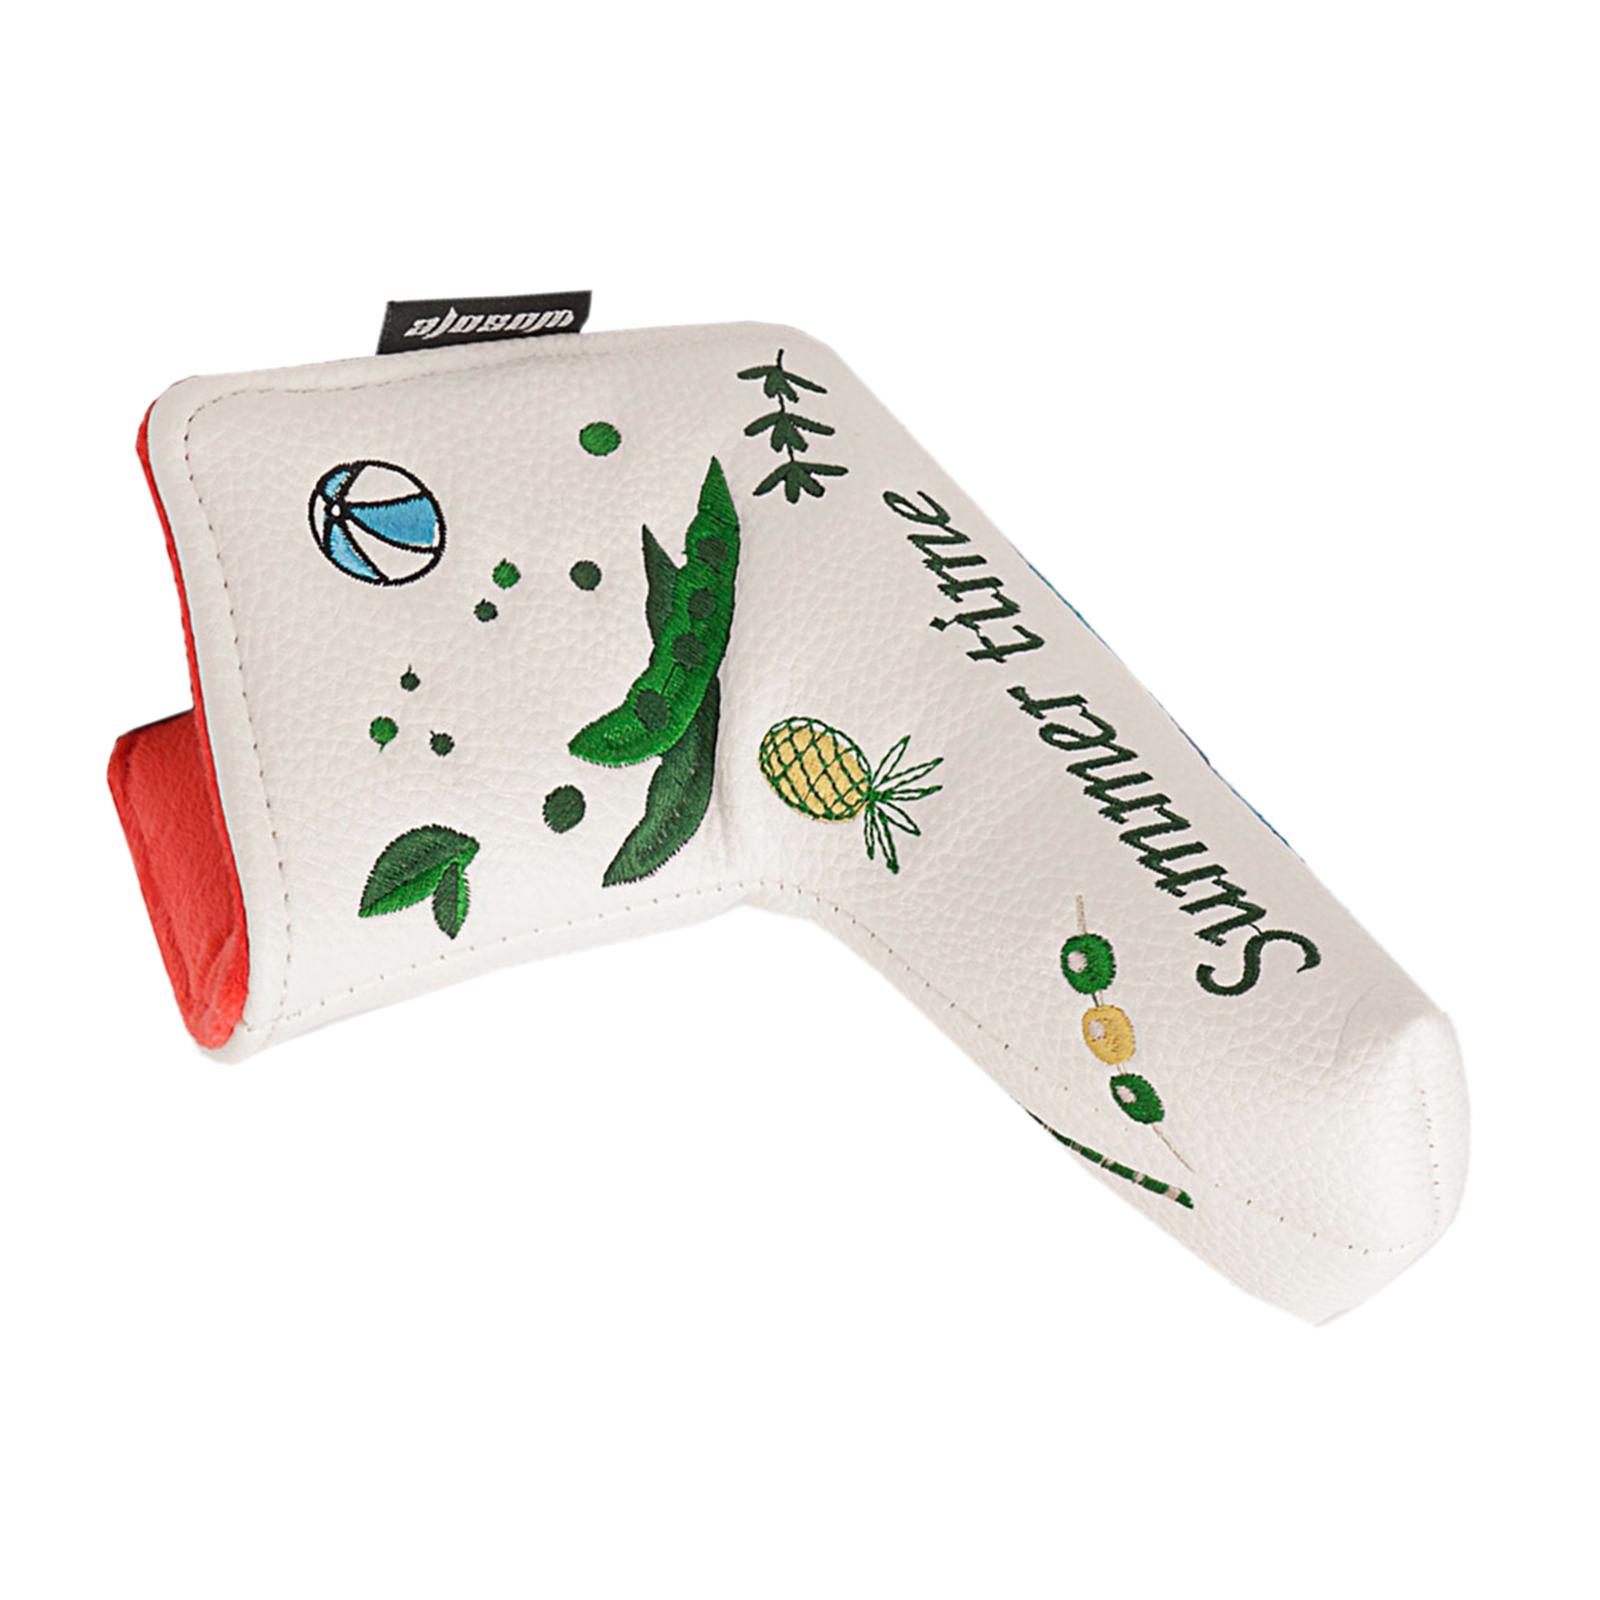 Golf Putter Head Cover Summer Elements Design Protection Fits All Brands white